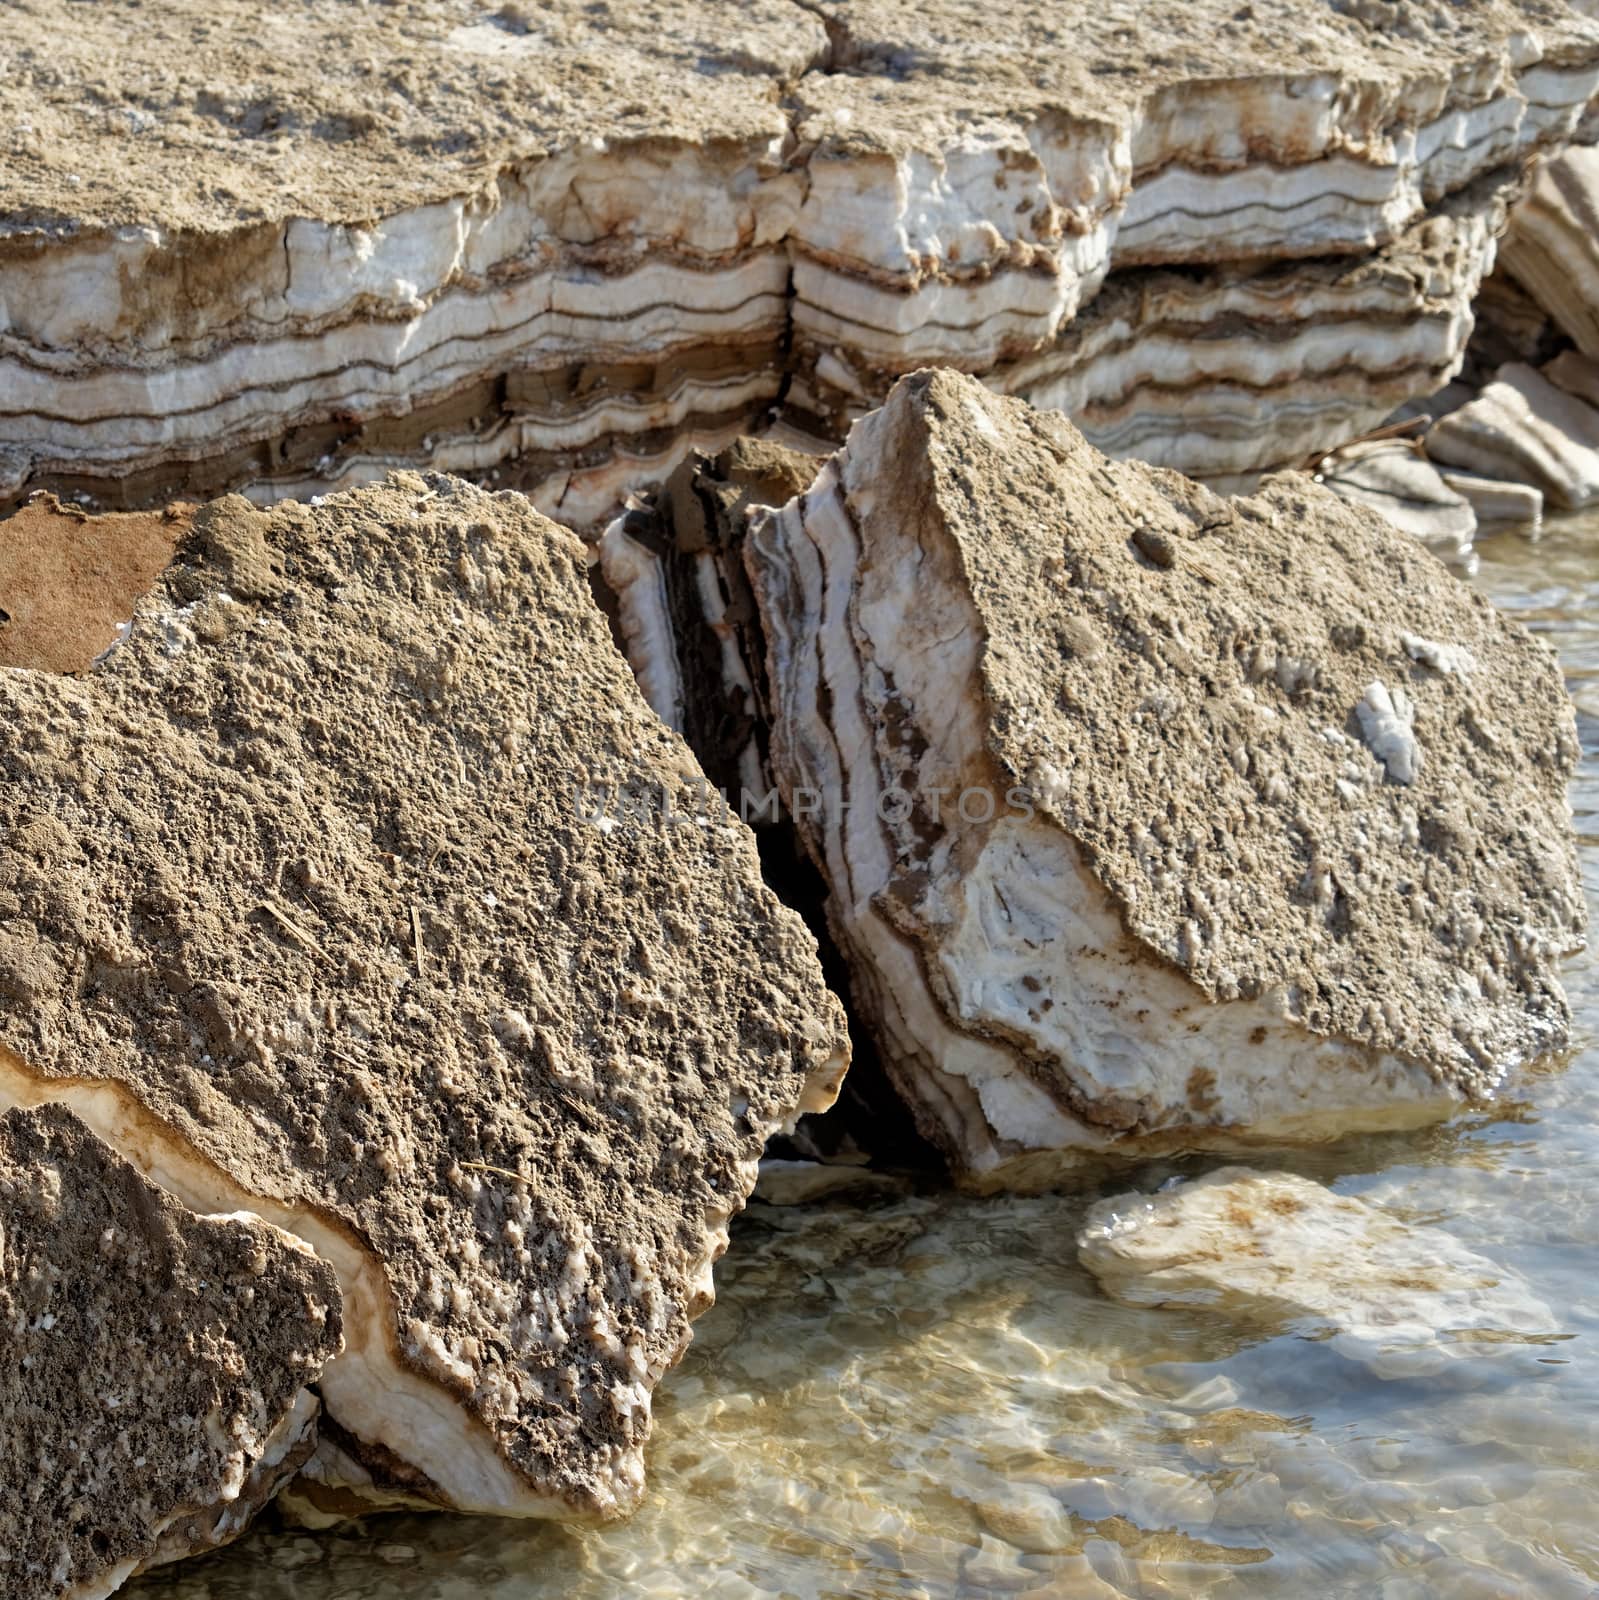 Salt plates with intermediate thin layers of mud on the Dead Sea coast in Jordan by geogif